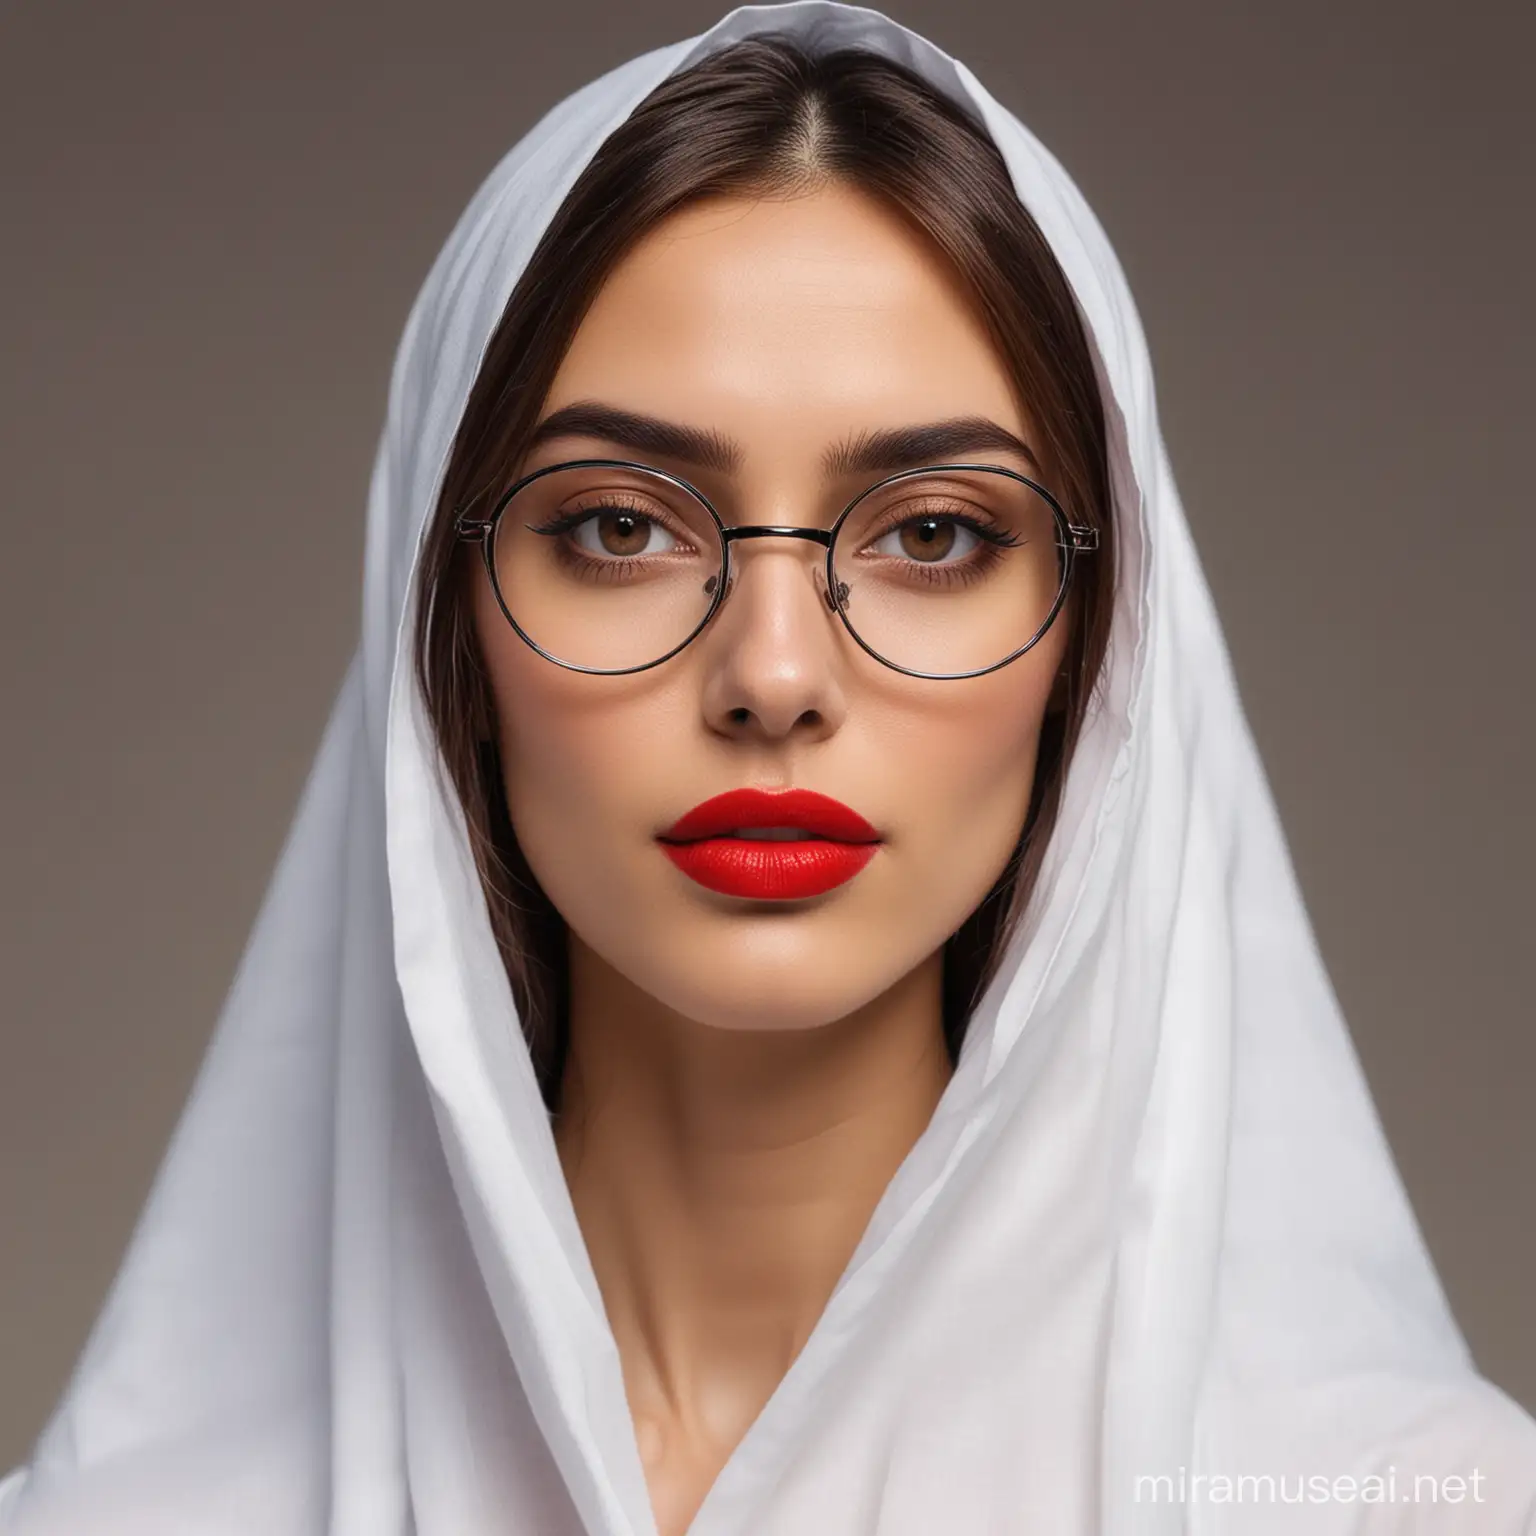 Stylish Woman in Chador with Glasses and Red Lips